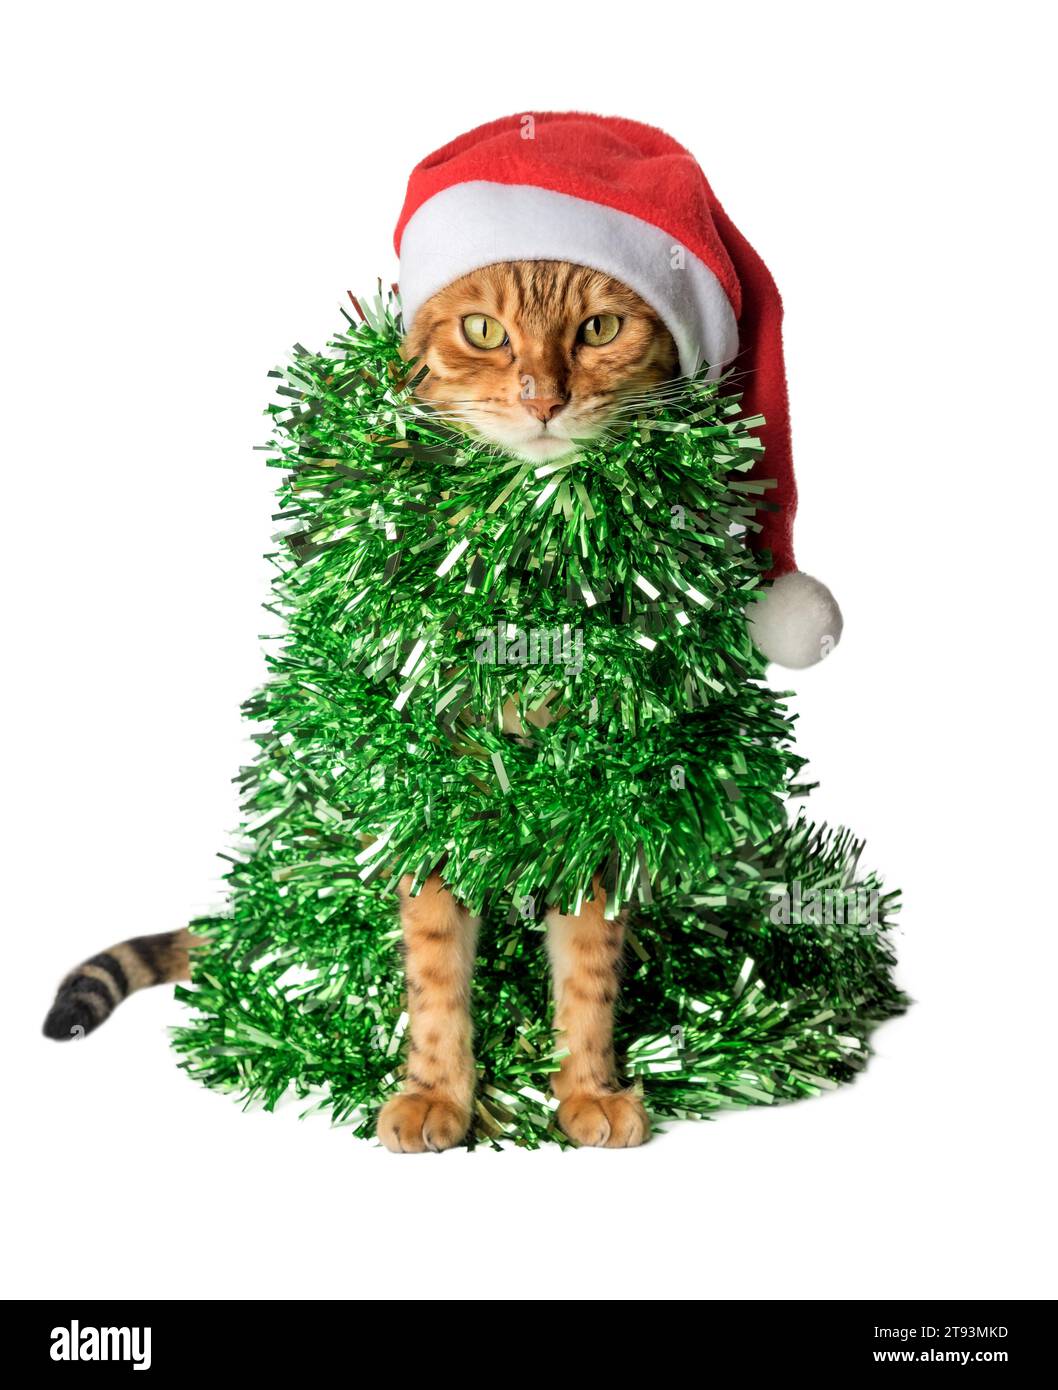 Funny cat in a Santa hat, wrapped in green garland or tinsel. Cat - Christmas tree on a white background. Stock Photo